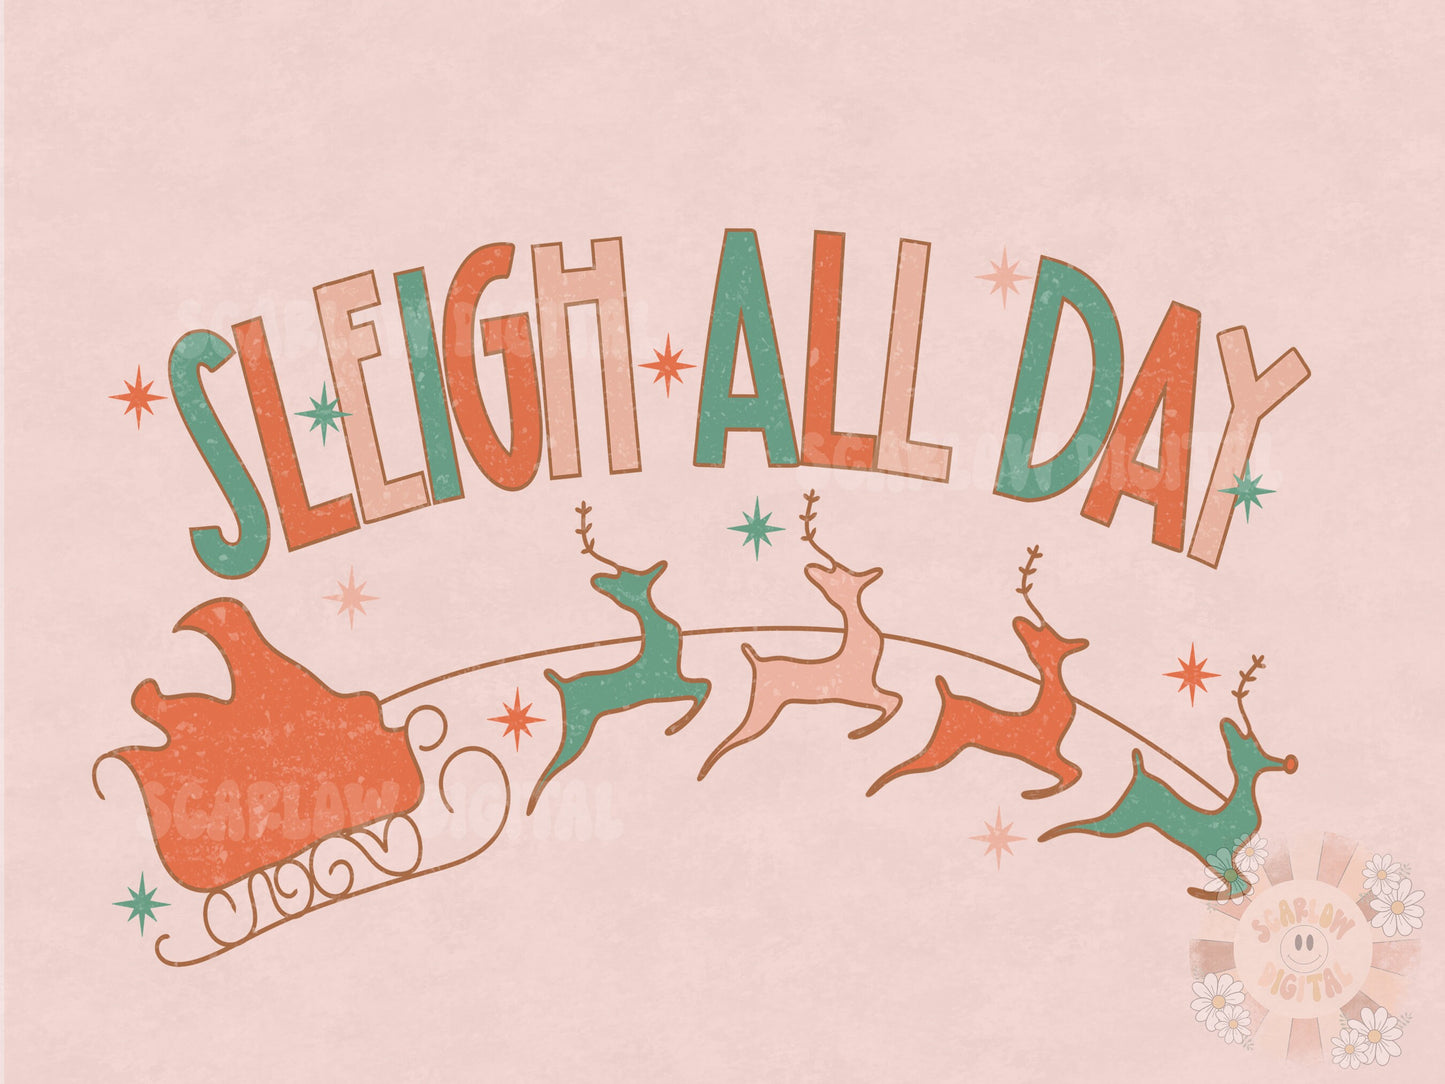 Sleigh All Day PNG-Christmas Sublimation Digital Design Download-Christmas png, Santa Claus png, Santas sleigh png, reindeer png, Xmas png